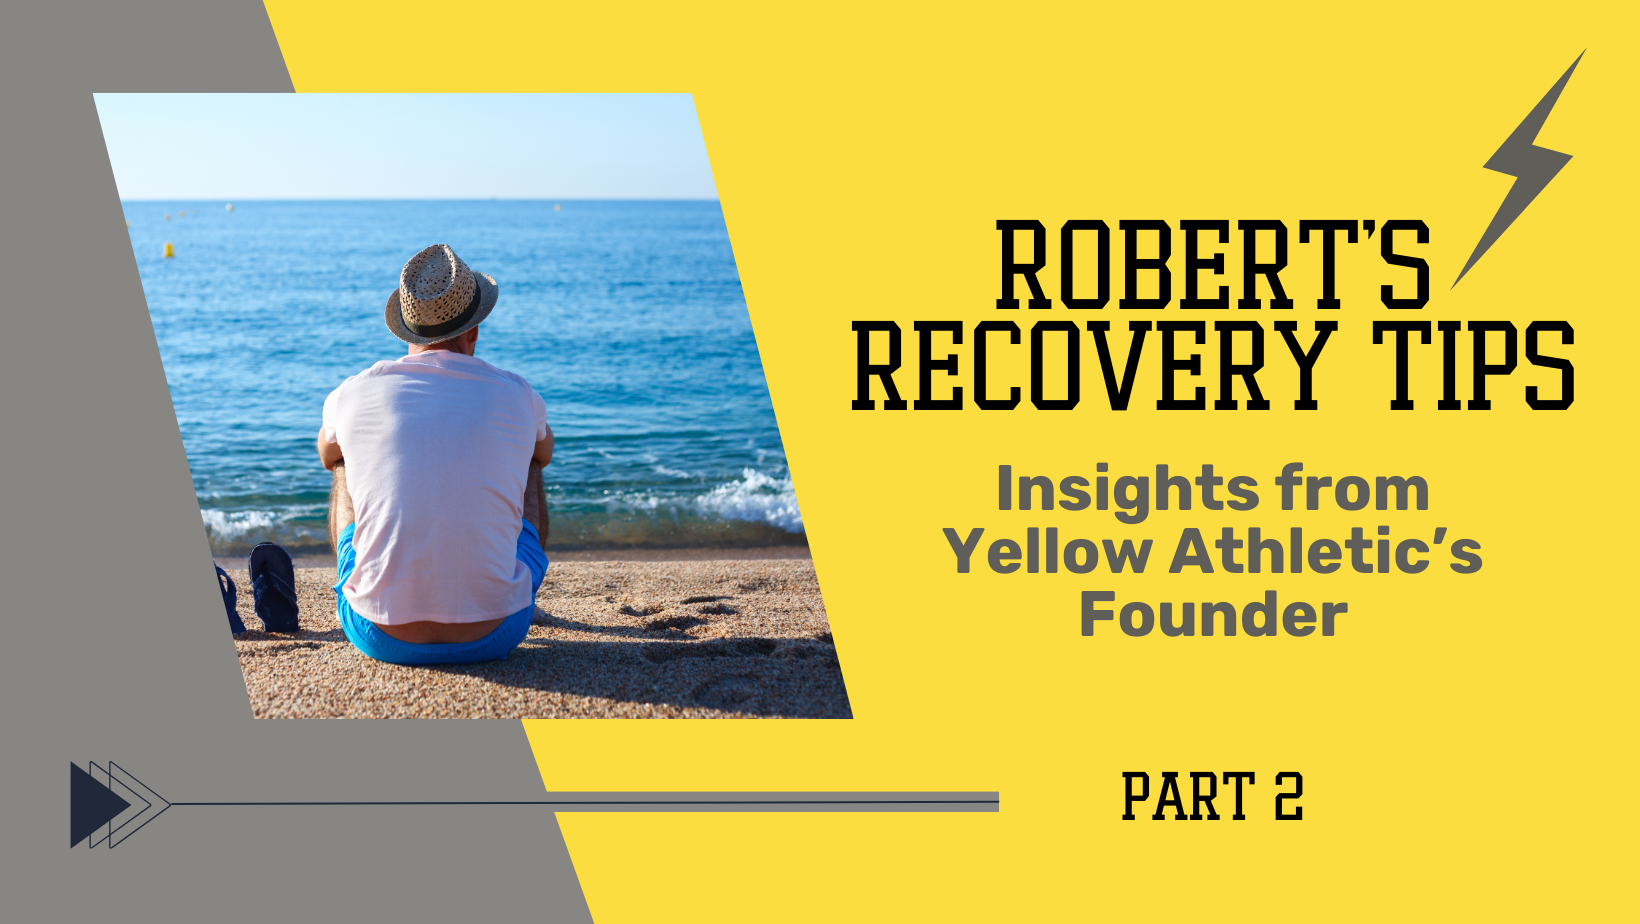 Robert's Recovery Tips: Insights from Yellow Athletic's Founder - Part 2